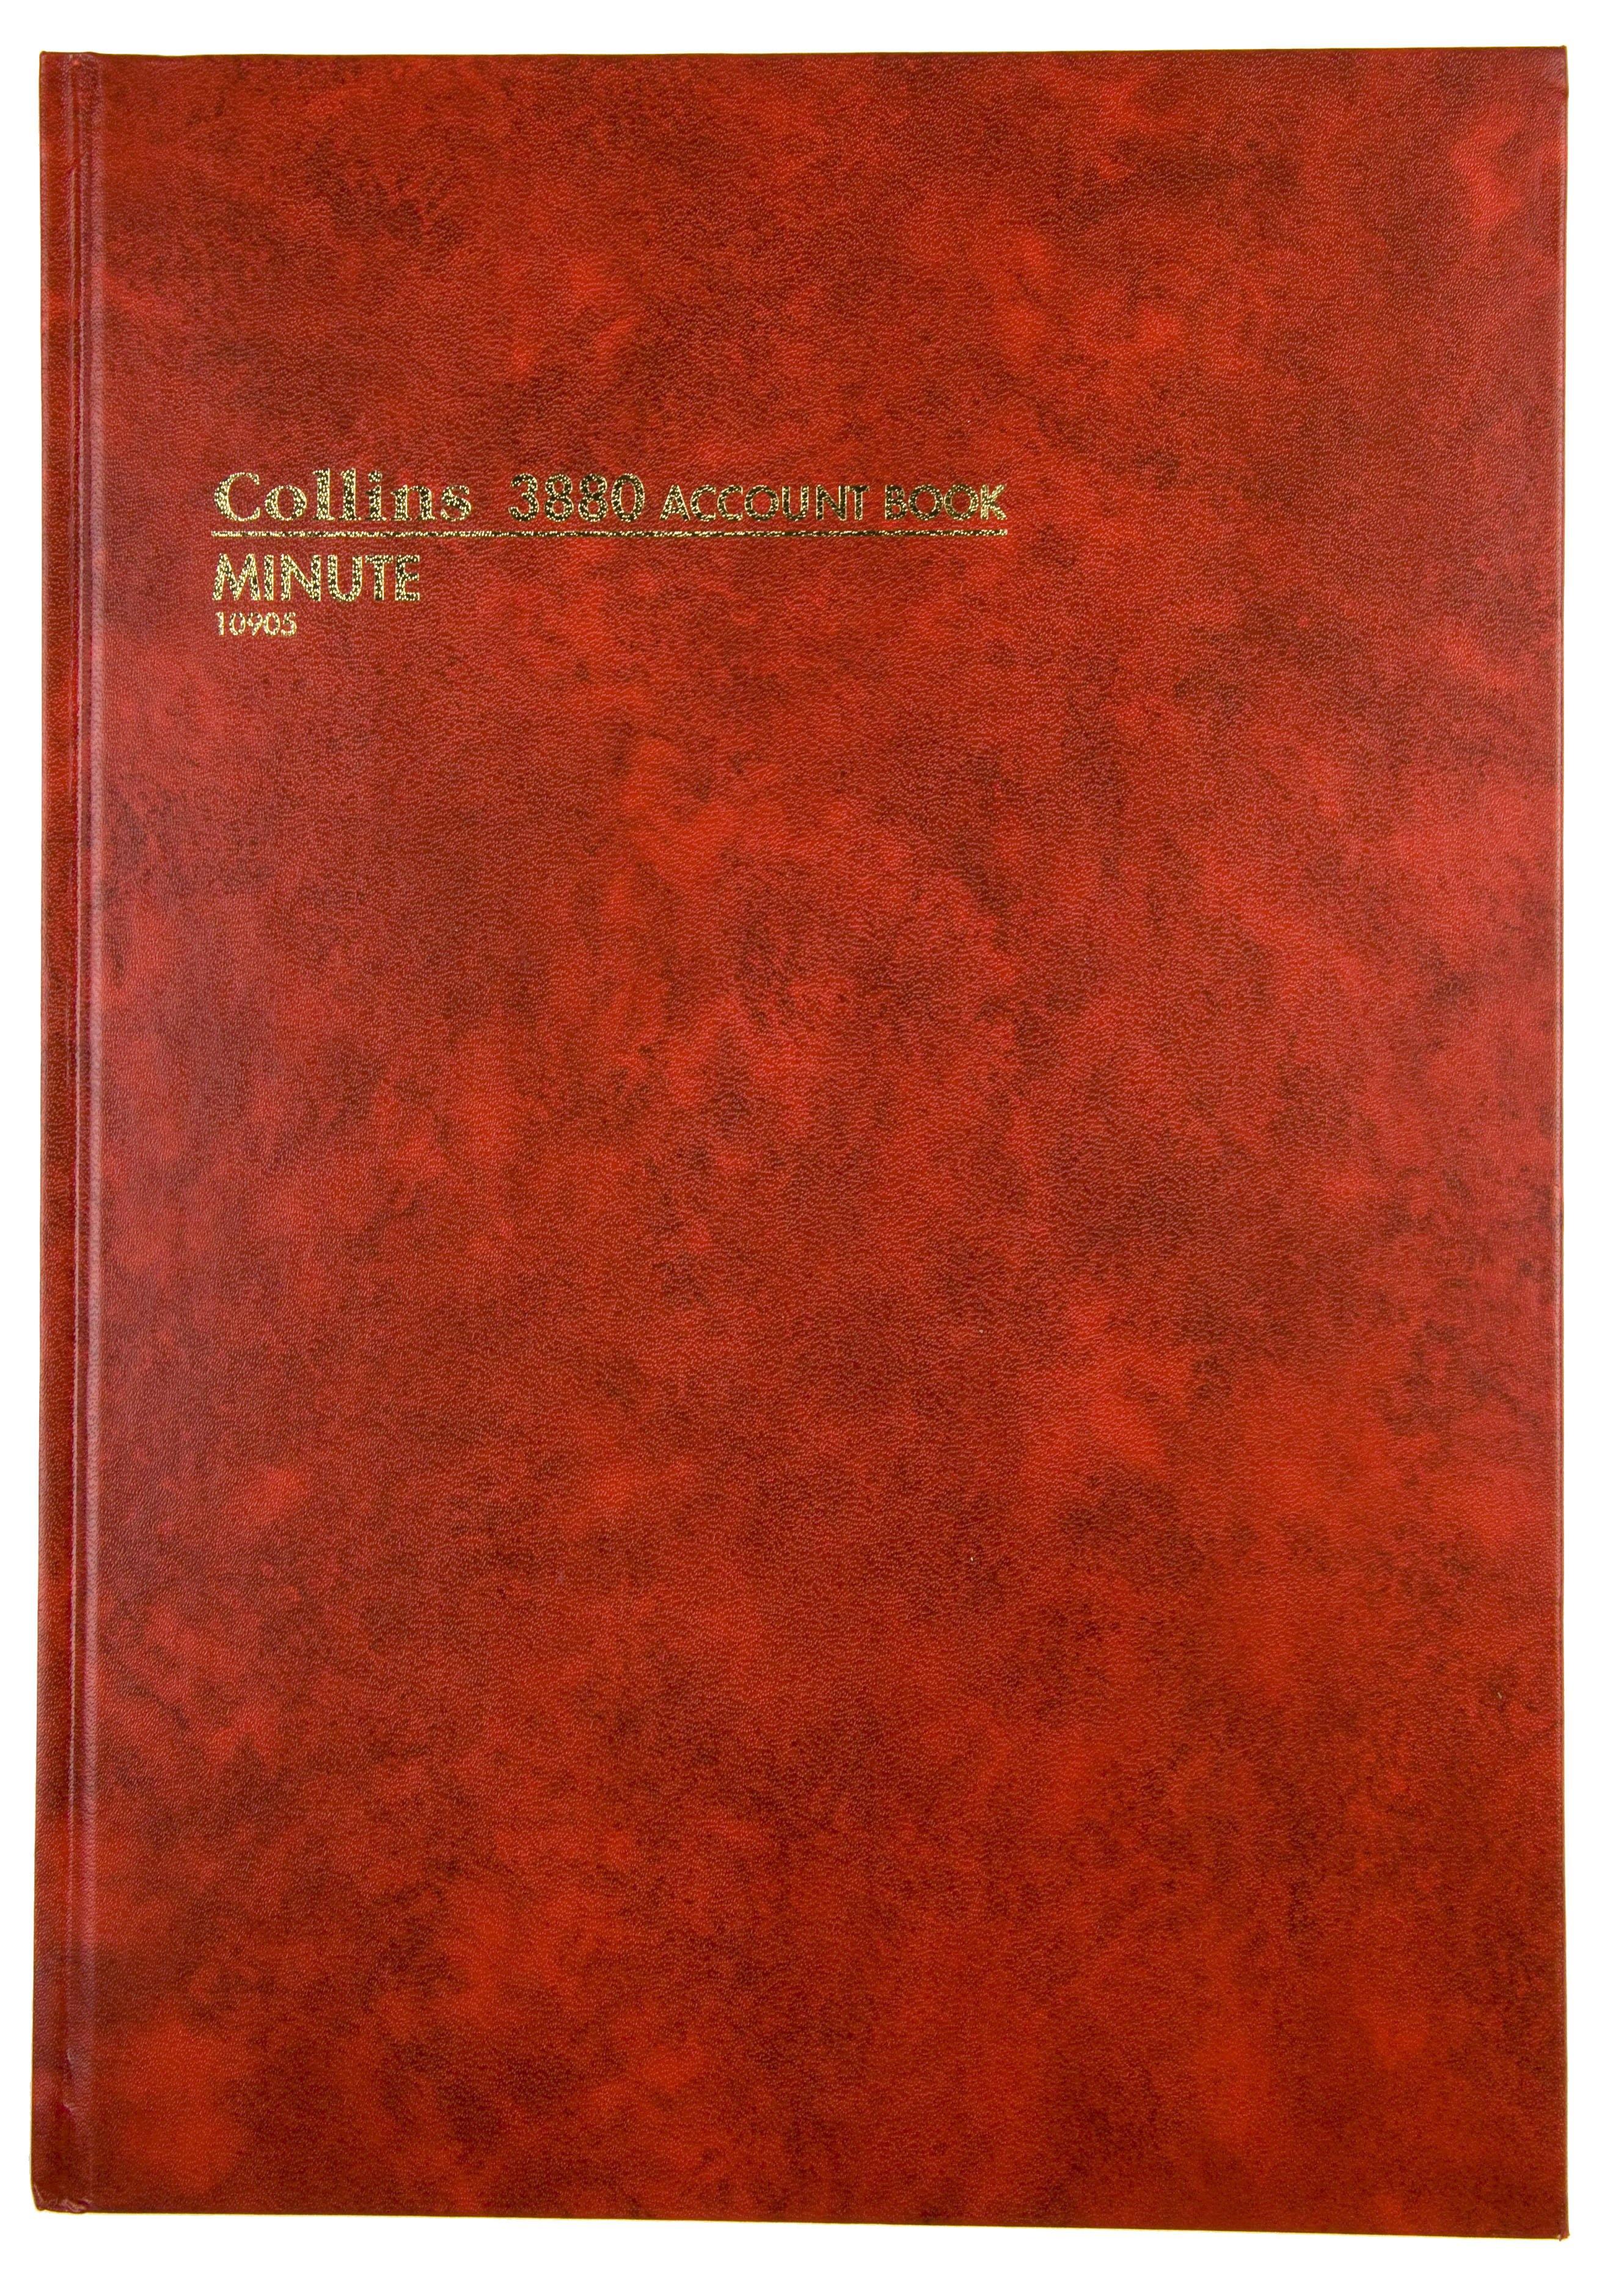 Account Book '3880' Series Minute - Paged - Collins Debden